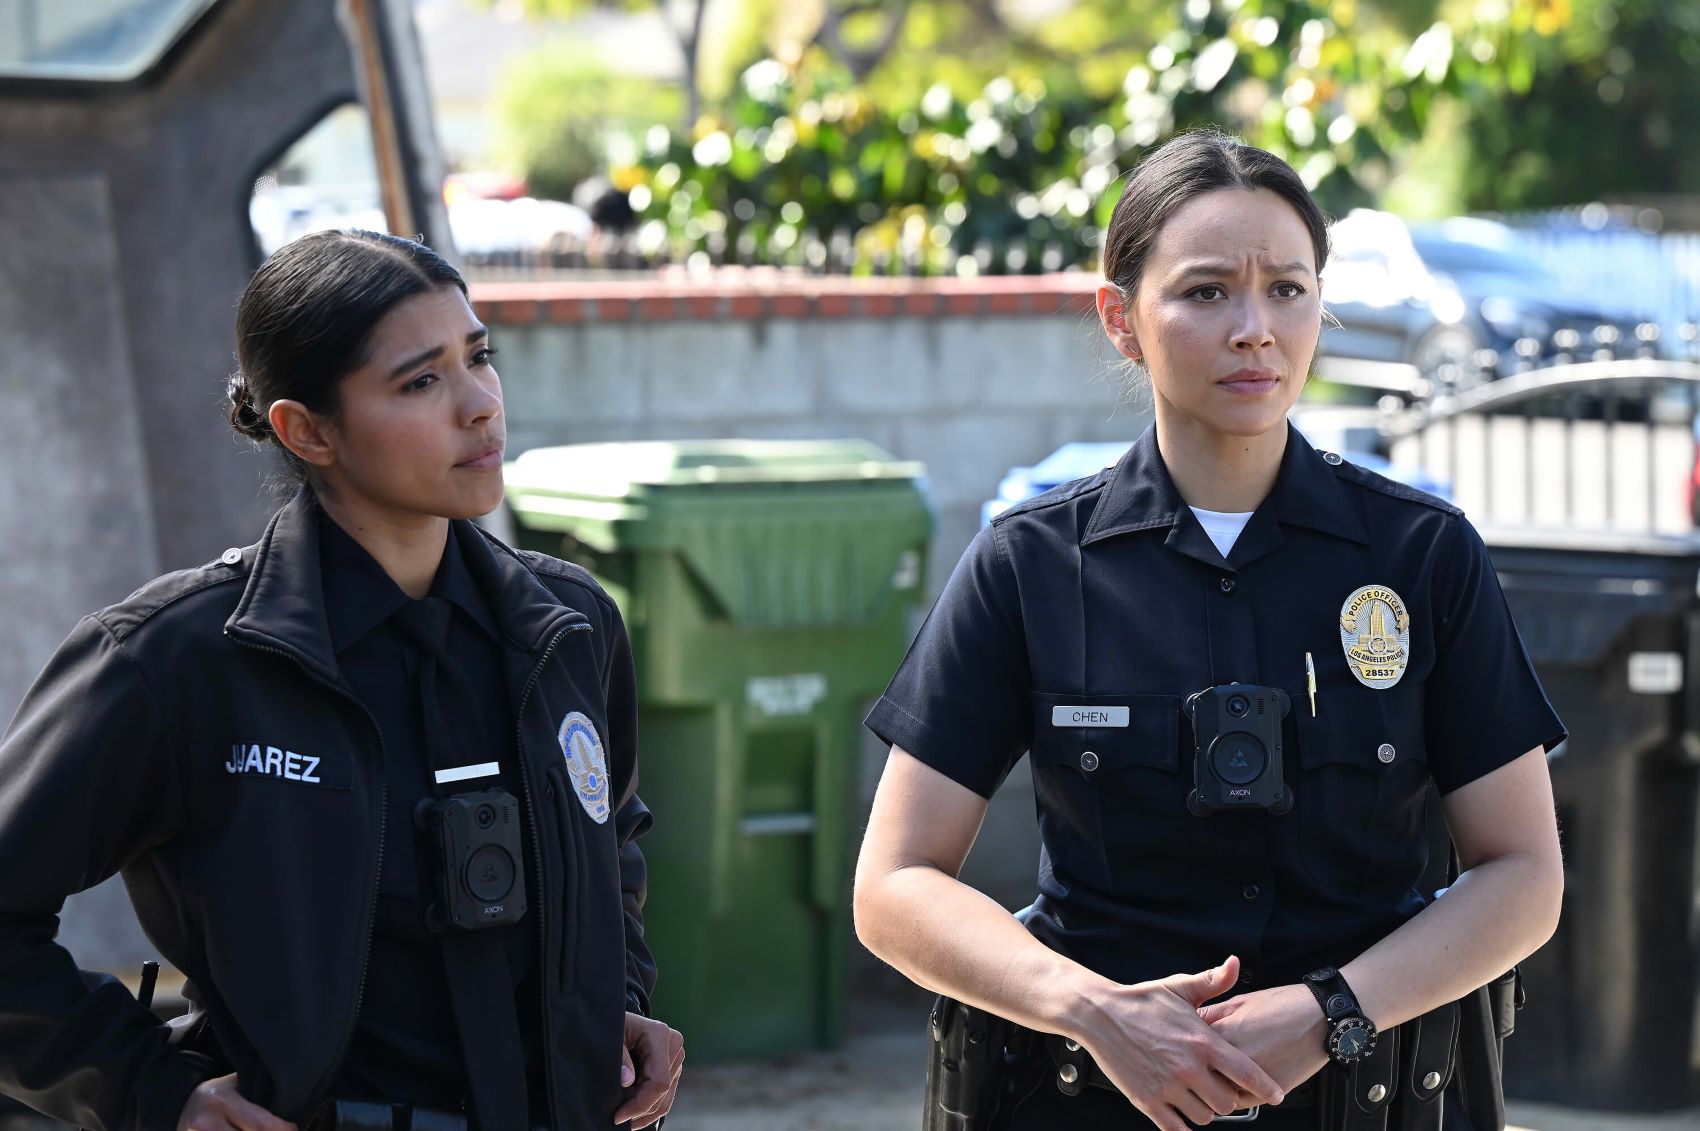 Lisseth Chavez as Celina Juarez and Melissa O'Neil as Lucy Chen share a scene in 'The Rookie' Season 5. In the photo, Celina and Lucy wear their dark blue police uniforms, but Celina also wears a dark blue jacket.